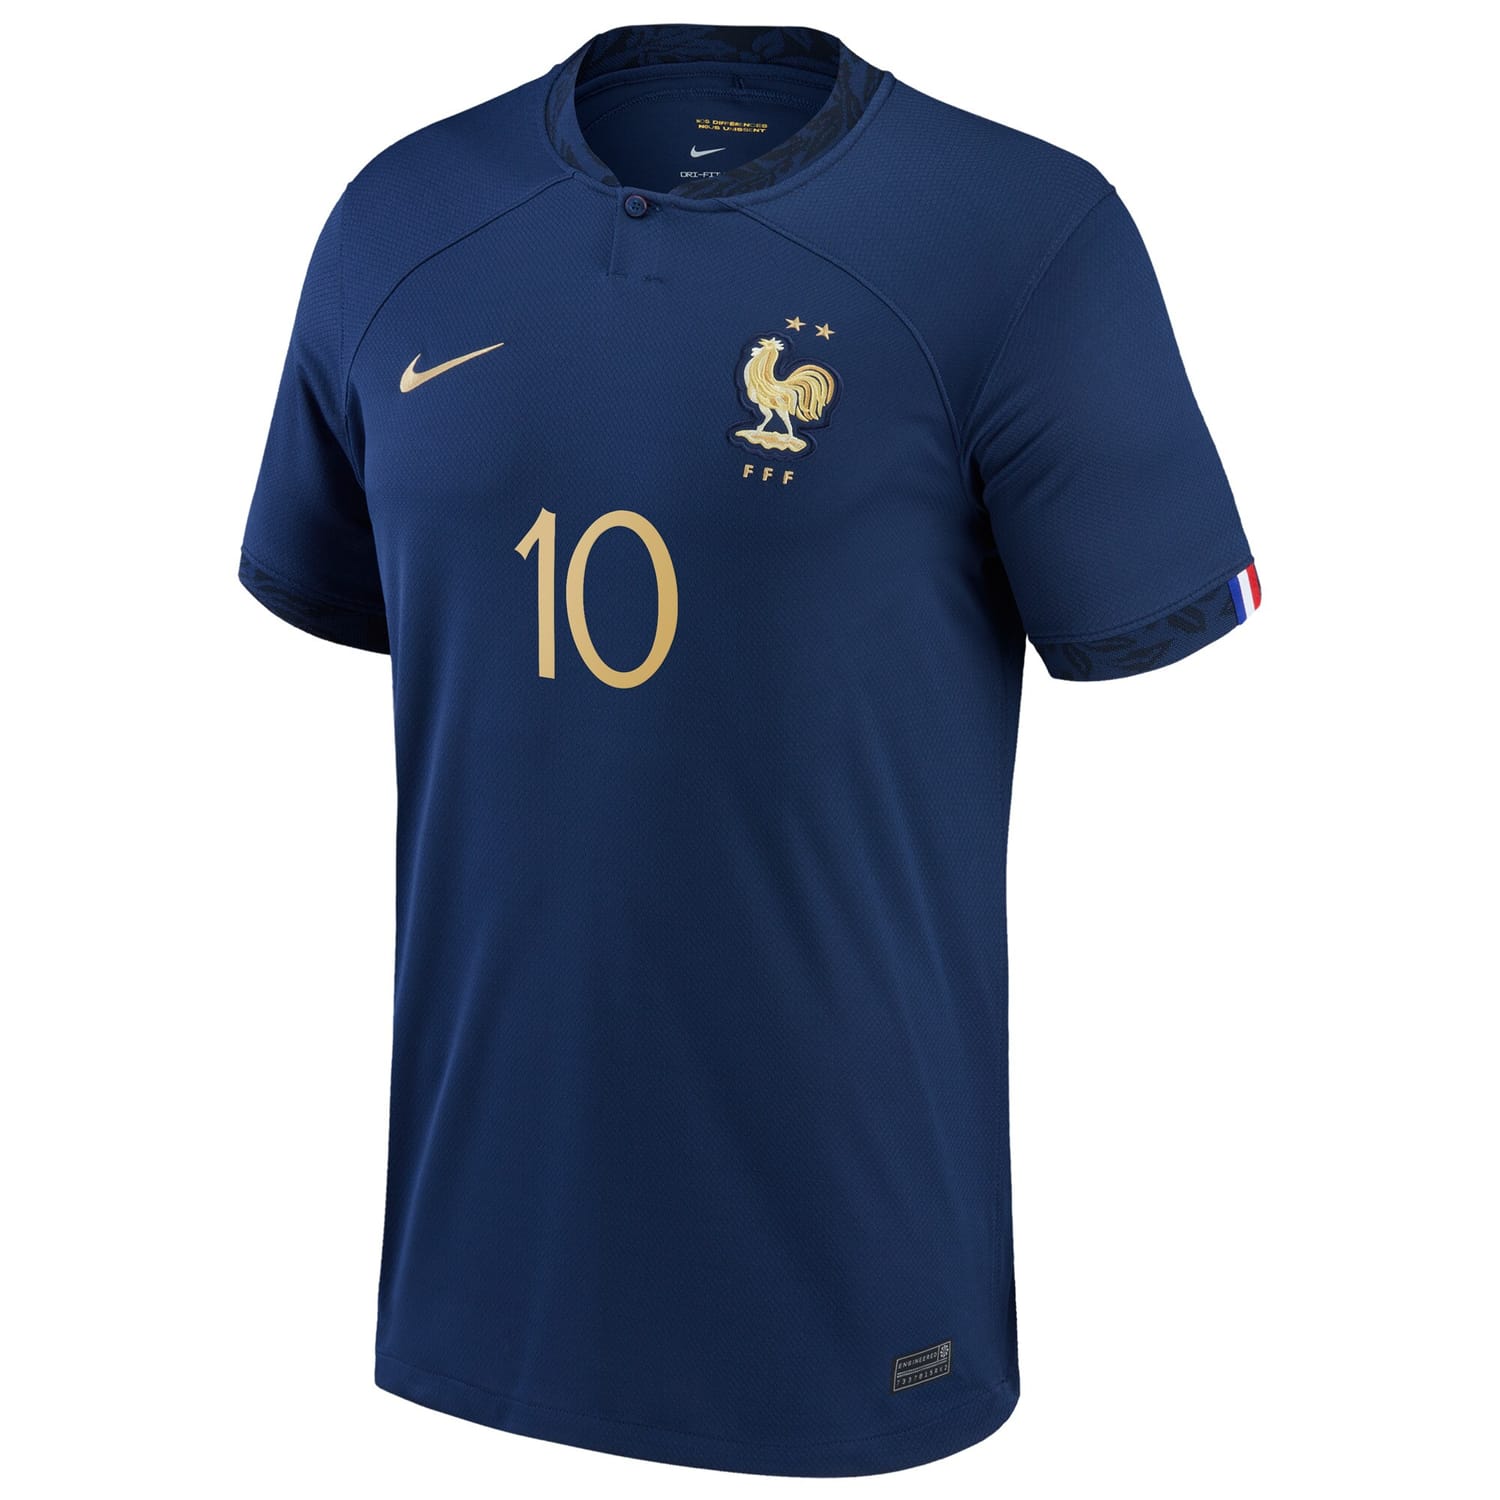 France National Team Home Jersey Shirt Navy 2022-23 player Kylian Mbappe printing for Men